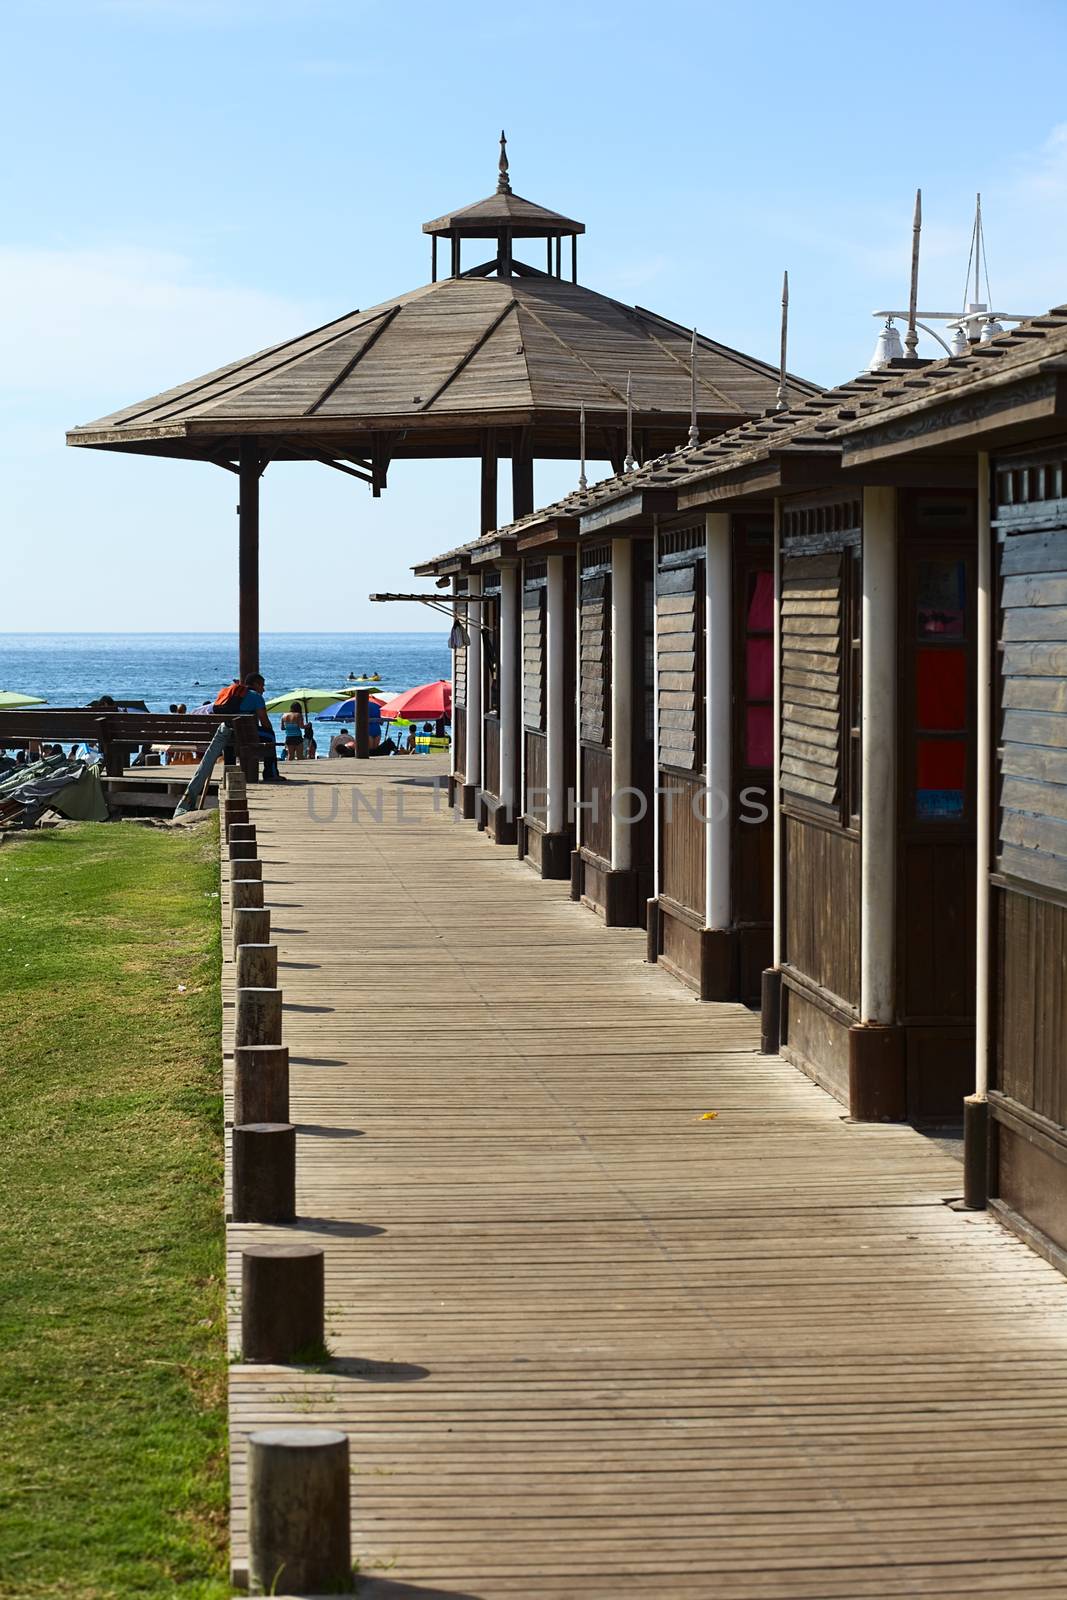 IQUIQUE, CHILE - JANUARY 23, 2015: Wooden sidewalk beside cabins leading to a wooden pavilion on Cavancha beach on January 23, 2015 in Iquique, Chile. Iquique is a free port city in Northern Chile.